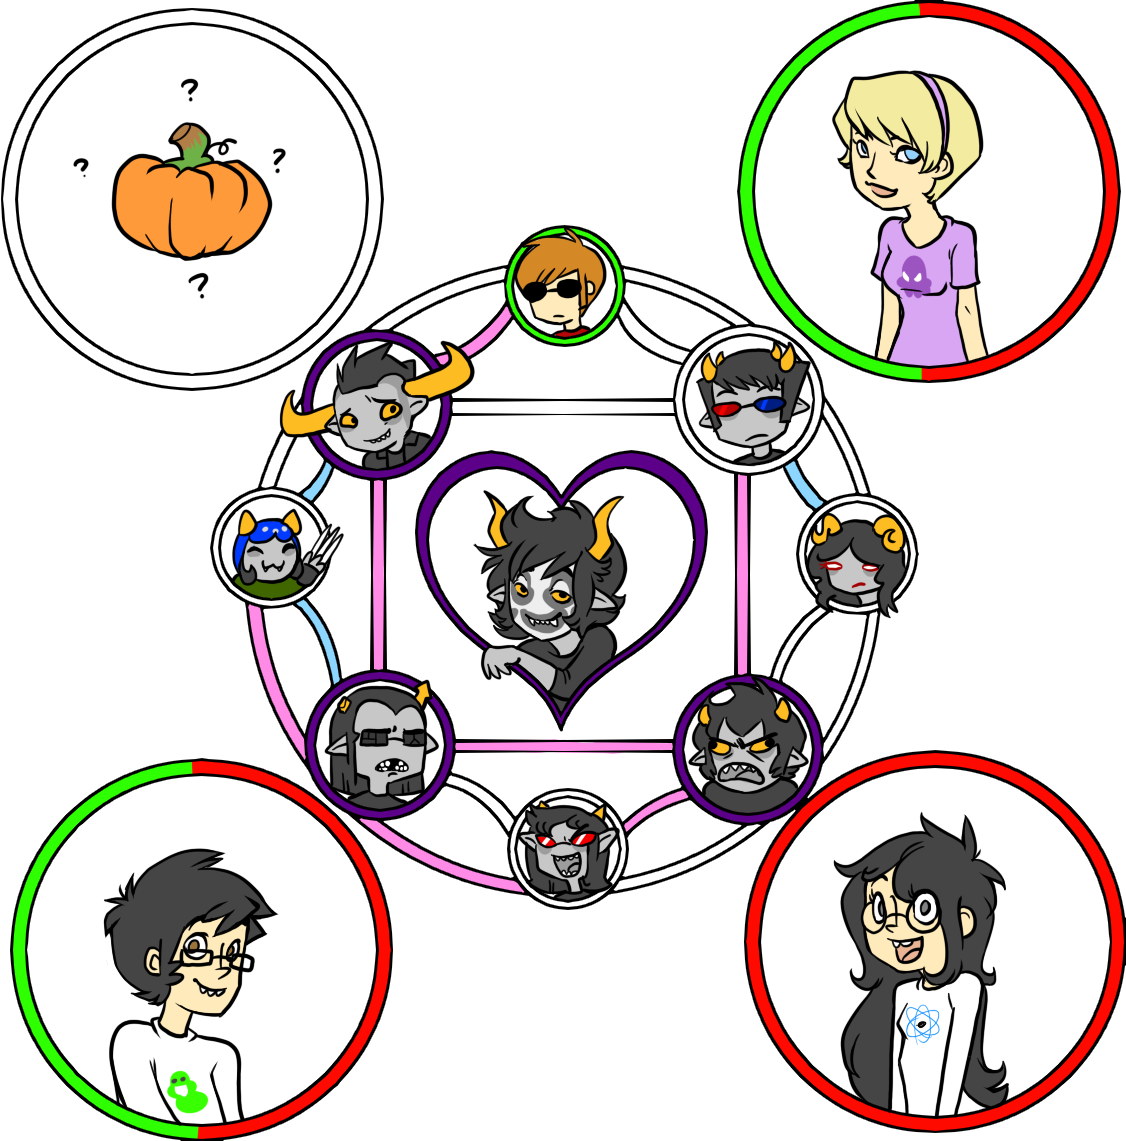 2spooky ? adorabloodthirsty aradia_megido beta_kids cavalreapurr claw_gloves dave_strider deleted_source dersecest equius_zahhak gamzee_makara guns_and_roses hammertime high_horse incest jade_harley john_egbert karkat_vantas ketchup_and_mustard lance_armstrong mauve_squiddle_shirt meowrails nepeta_leijon pbj prospitcest pumpkin rose_lalonde s'mores scratch_and_sniff shipping shipping_chart sollux_captor starter_outfit strongmad tavros_nitram terezi_pyrope tropicshipping whitekitestrings